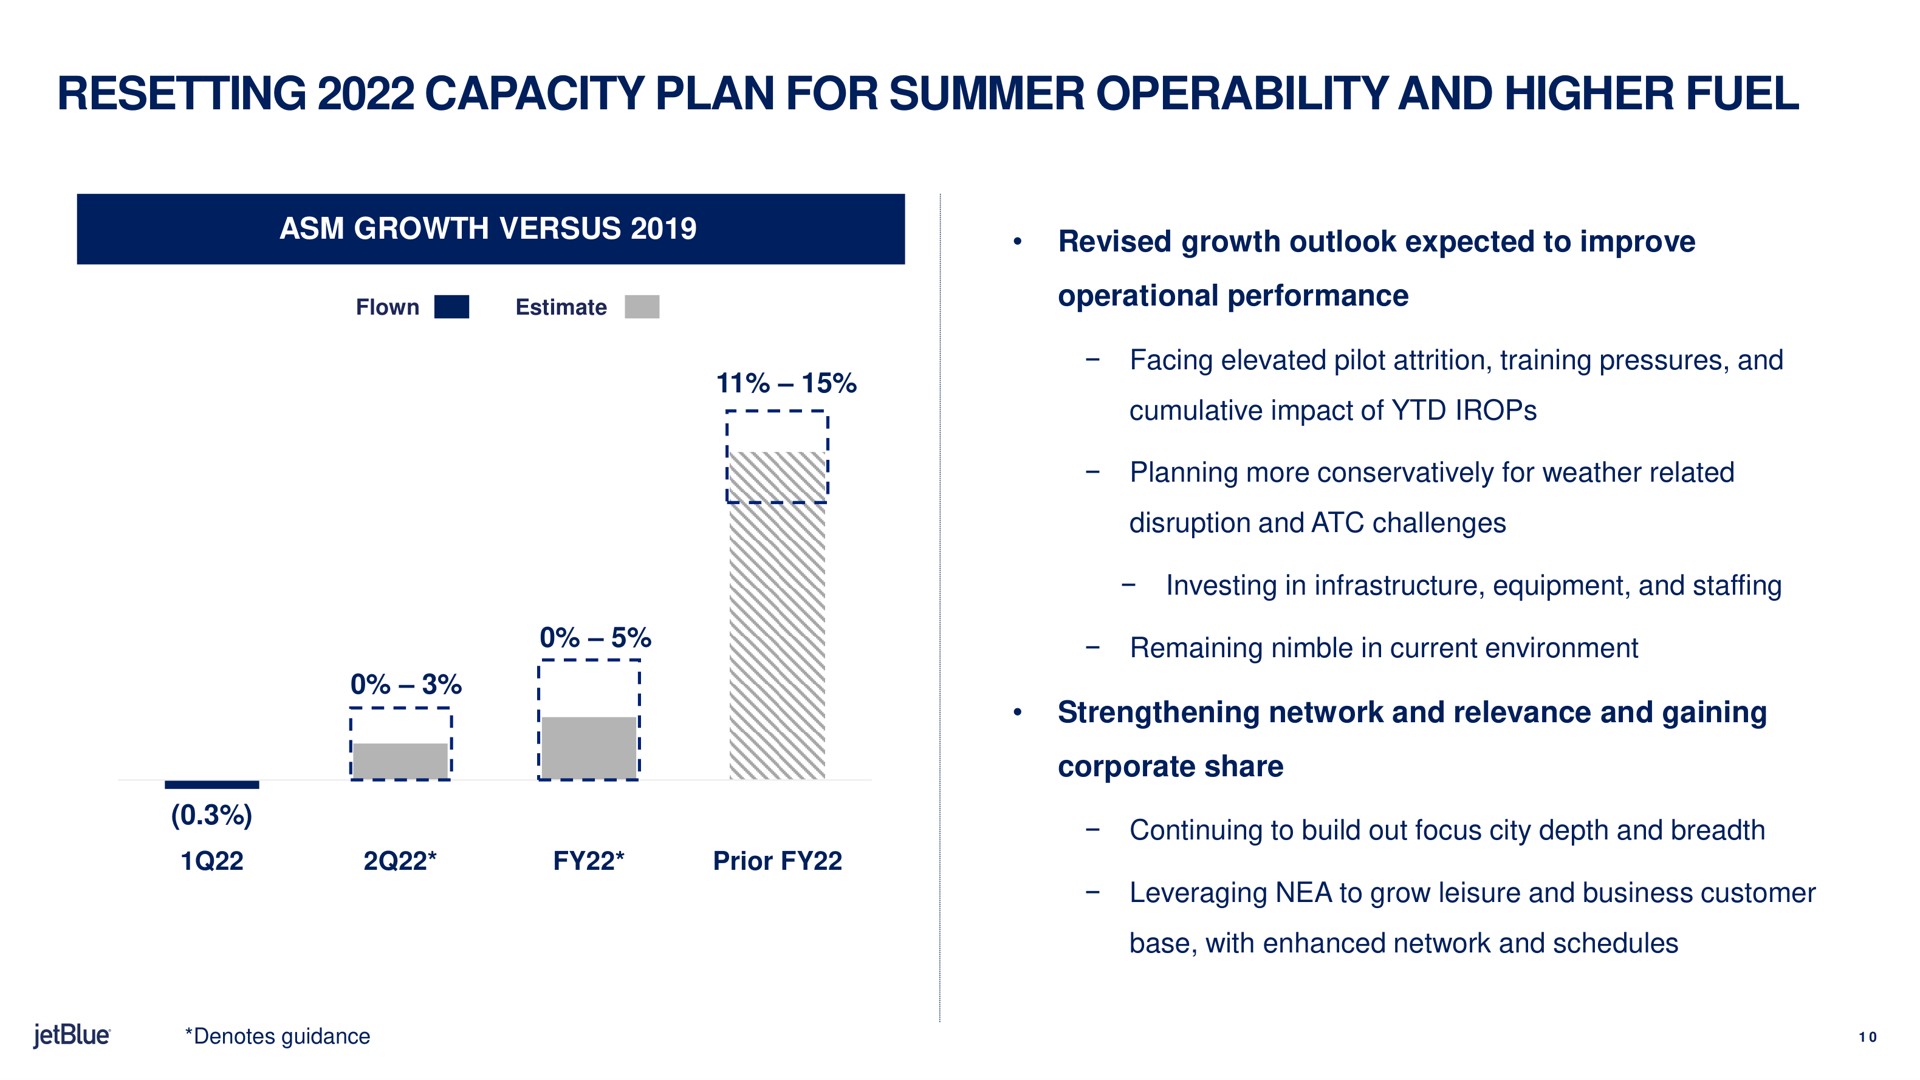 resetting capacity plan for summer operability and higher fuel | jetBlue